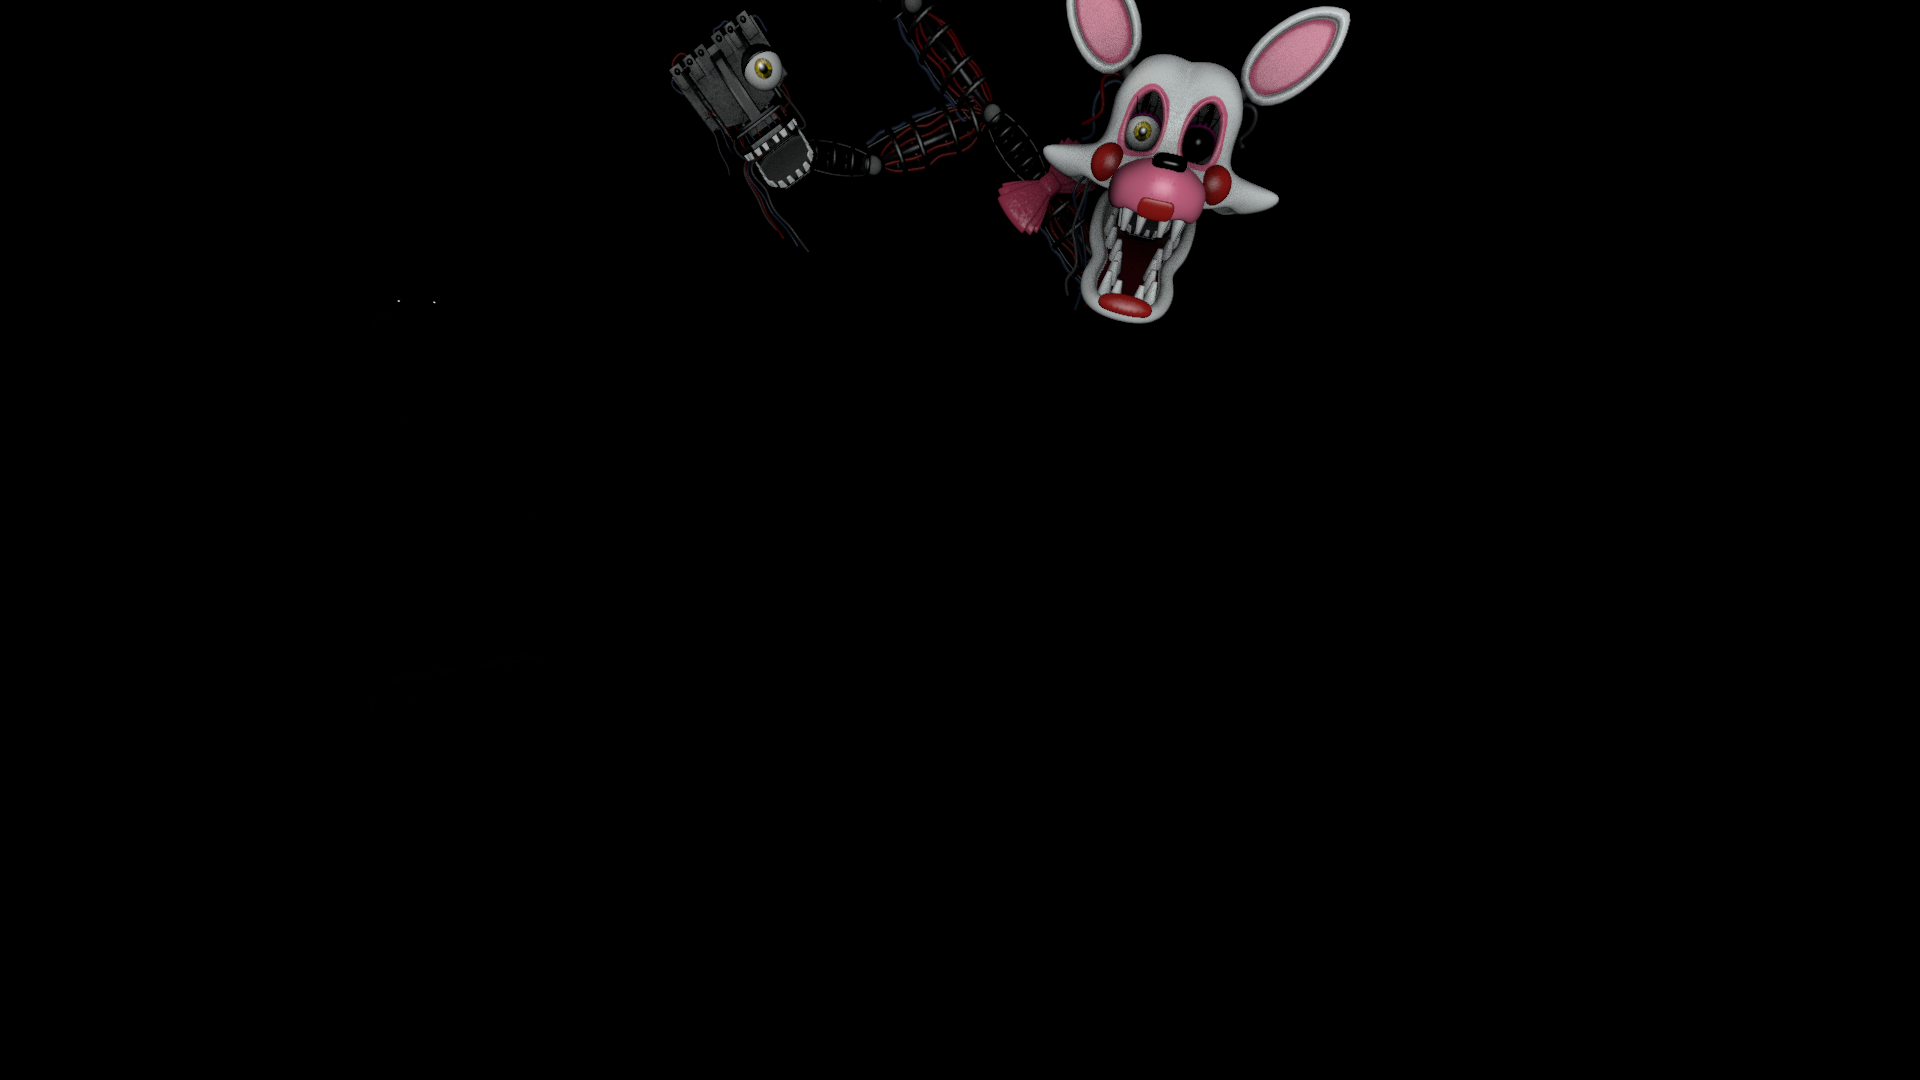 Video Game Five Nights At Freddy's 2 HD Wallpaper | Background Image